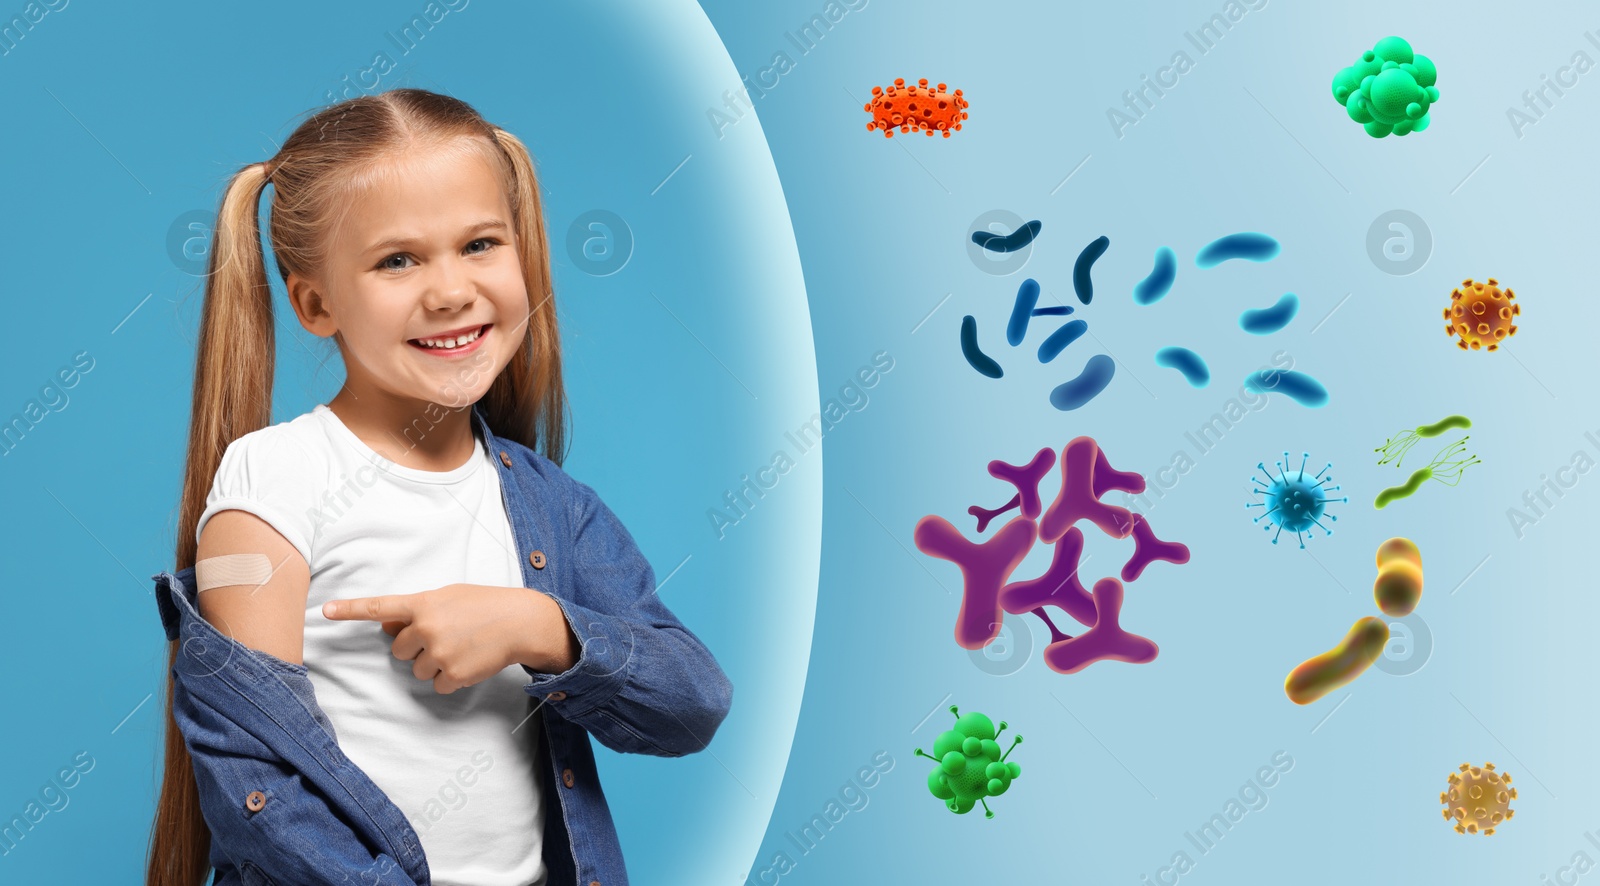 Image of Girl with strong immunity due to vaccination surrounded by viruses on blue background, banner design